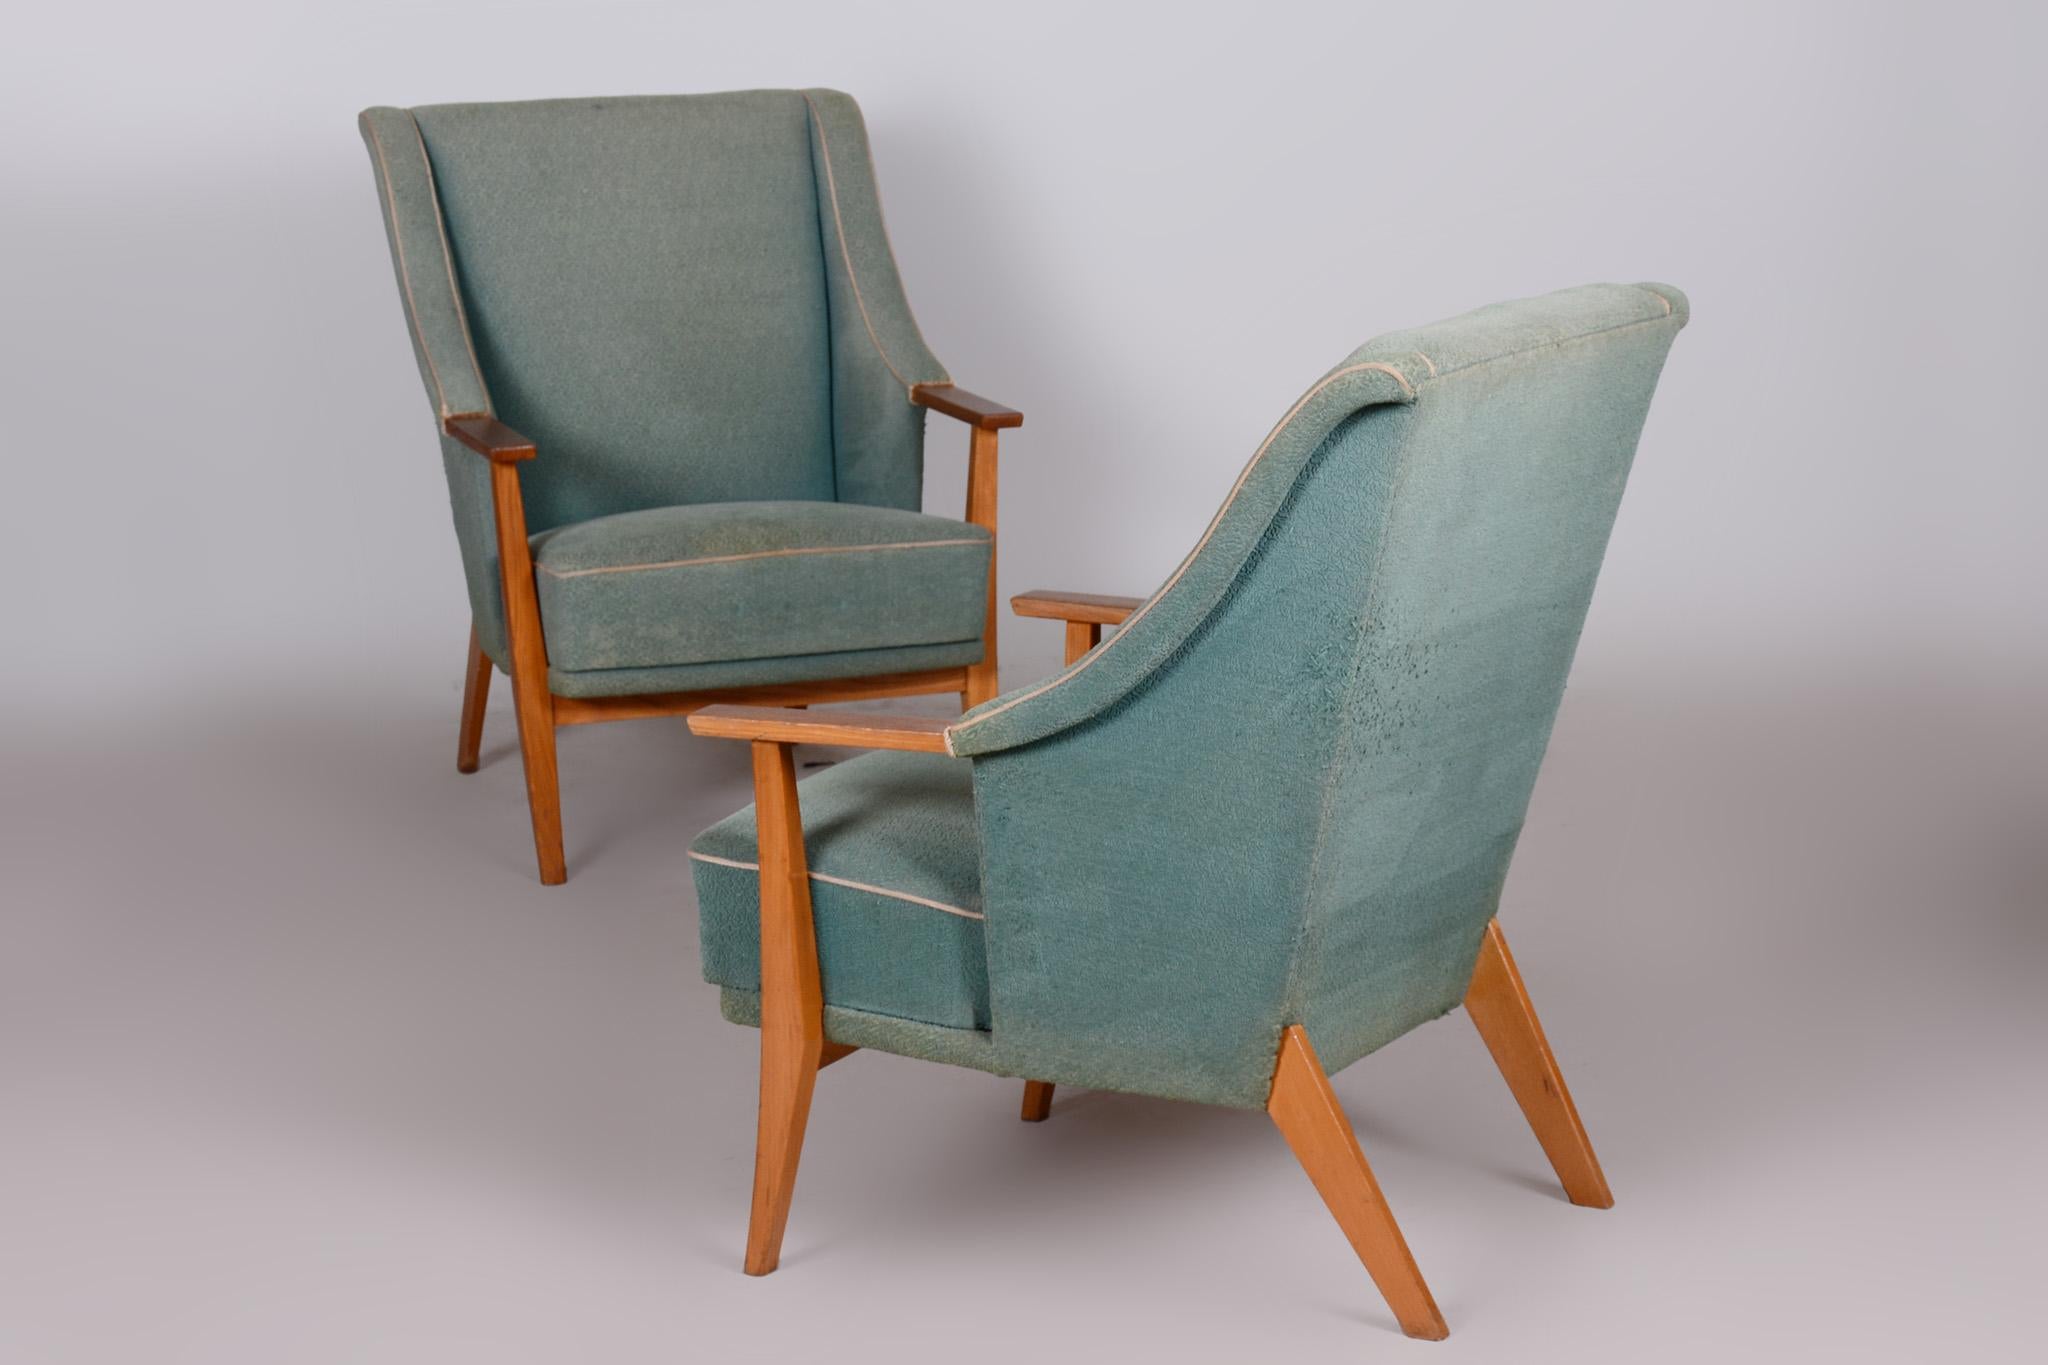 Pair of Unique Green Beech ArtDeco Armchairs Made in 1940s, Denmark For Sale 7